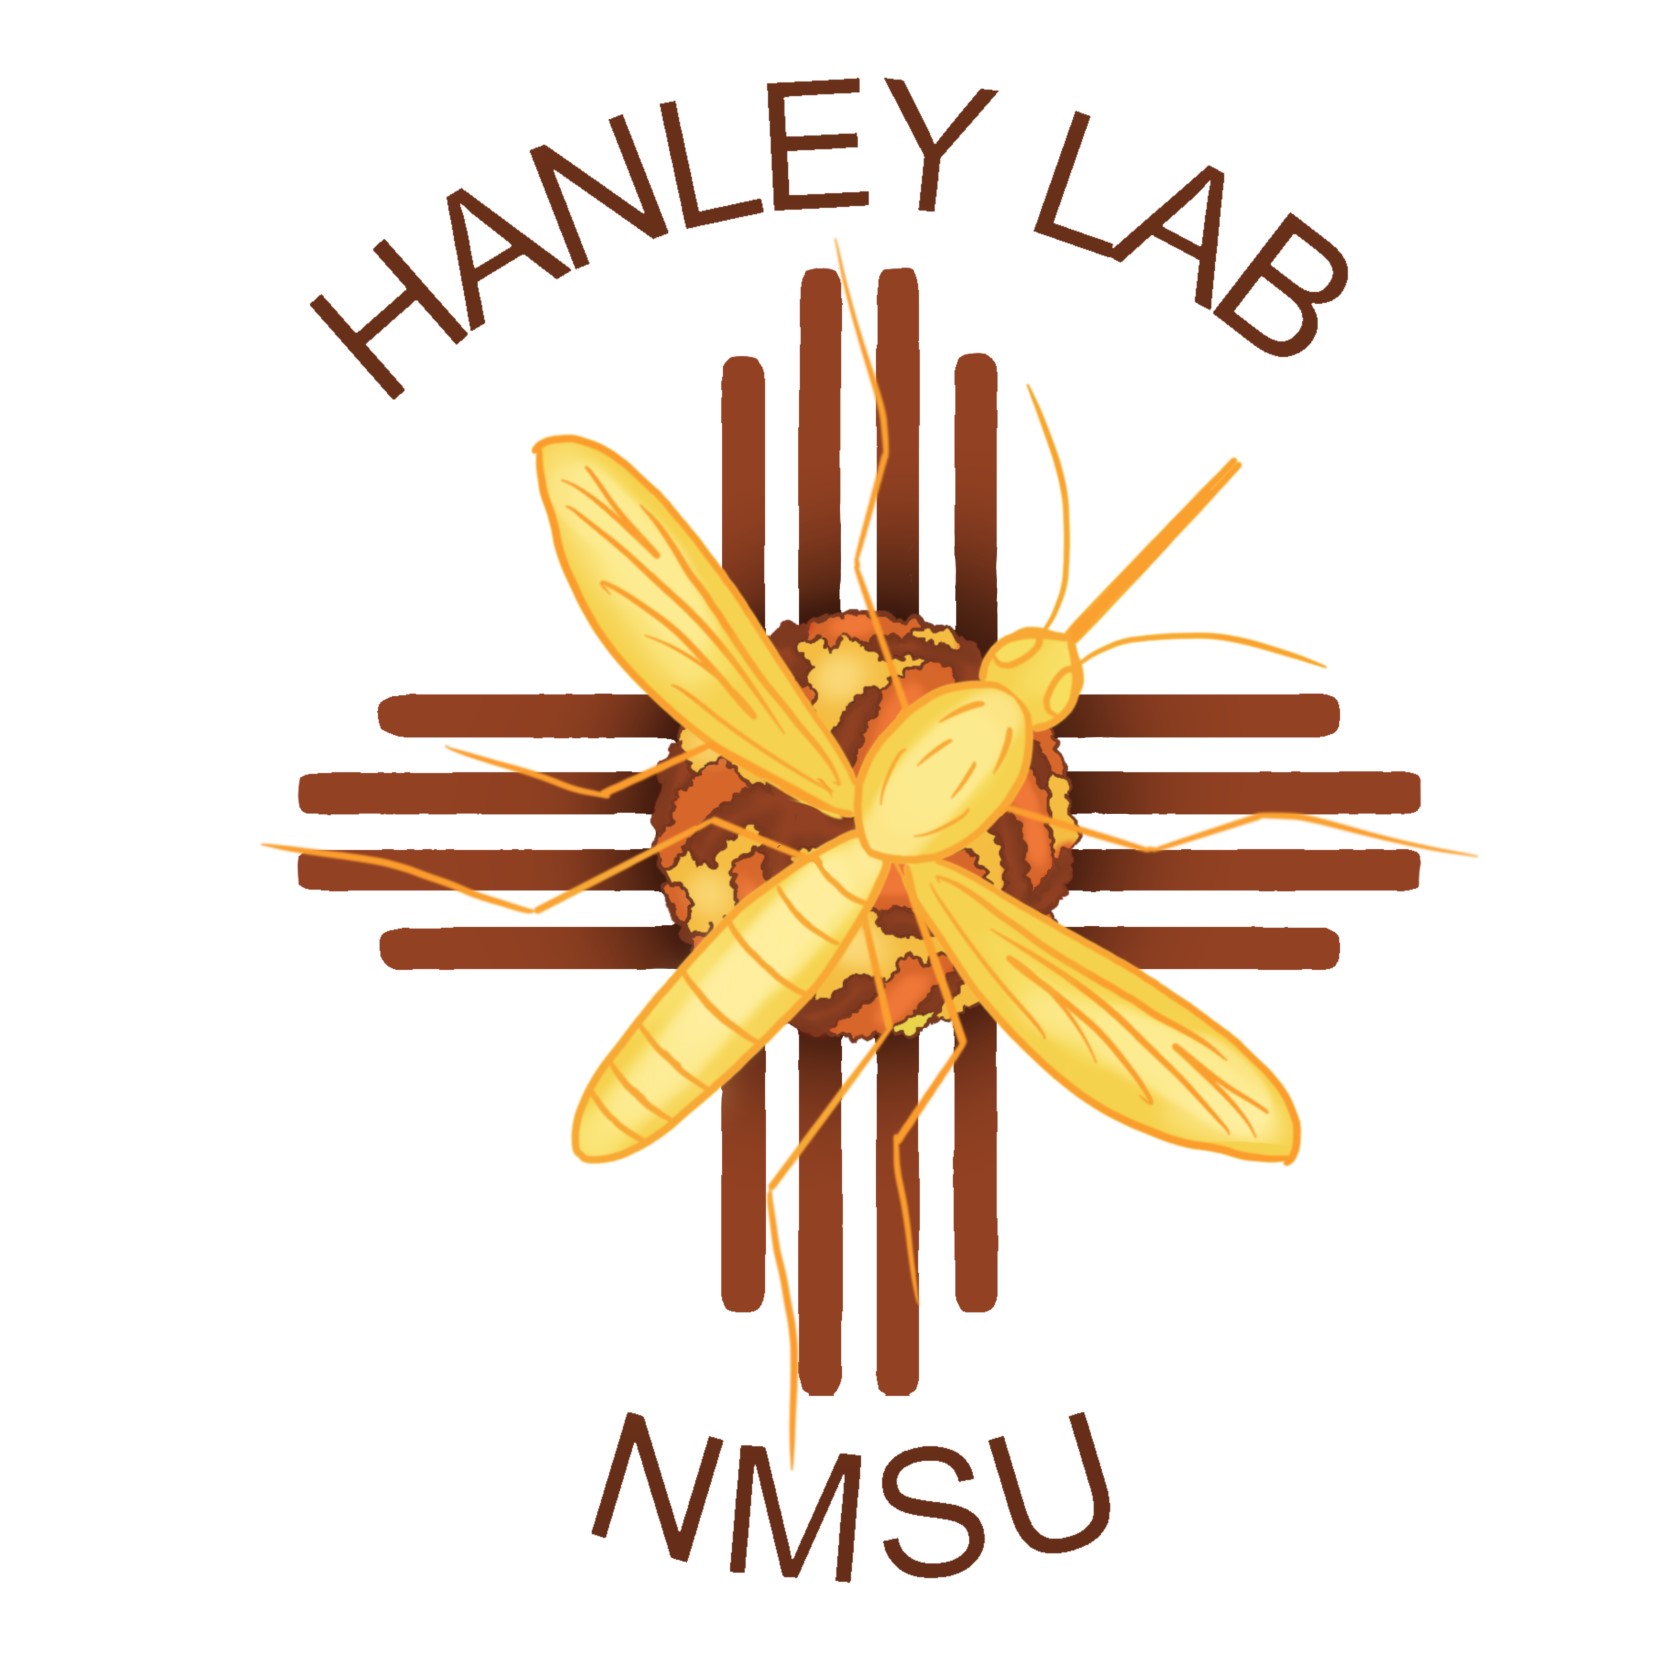 Hanley-Lab-Logo---White-Background-with-Text-Cropped.jpeg